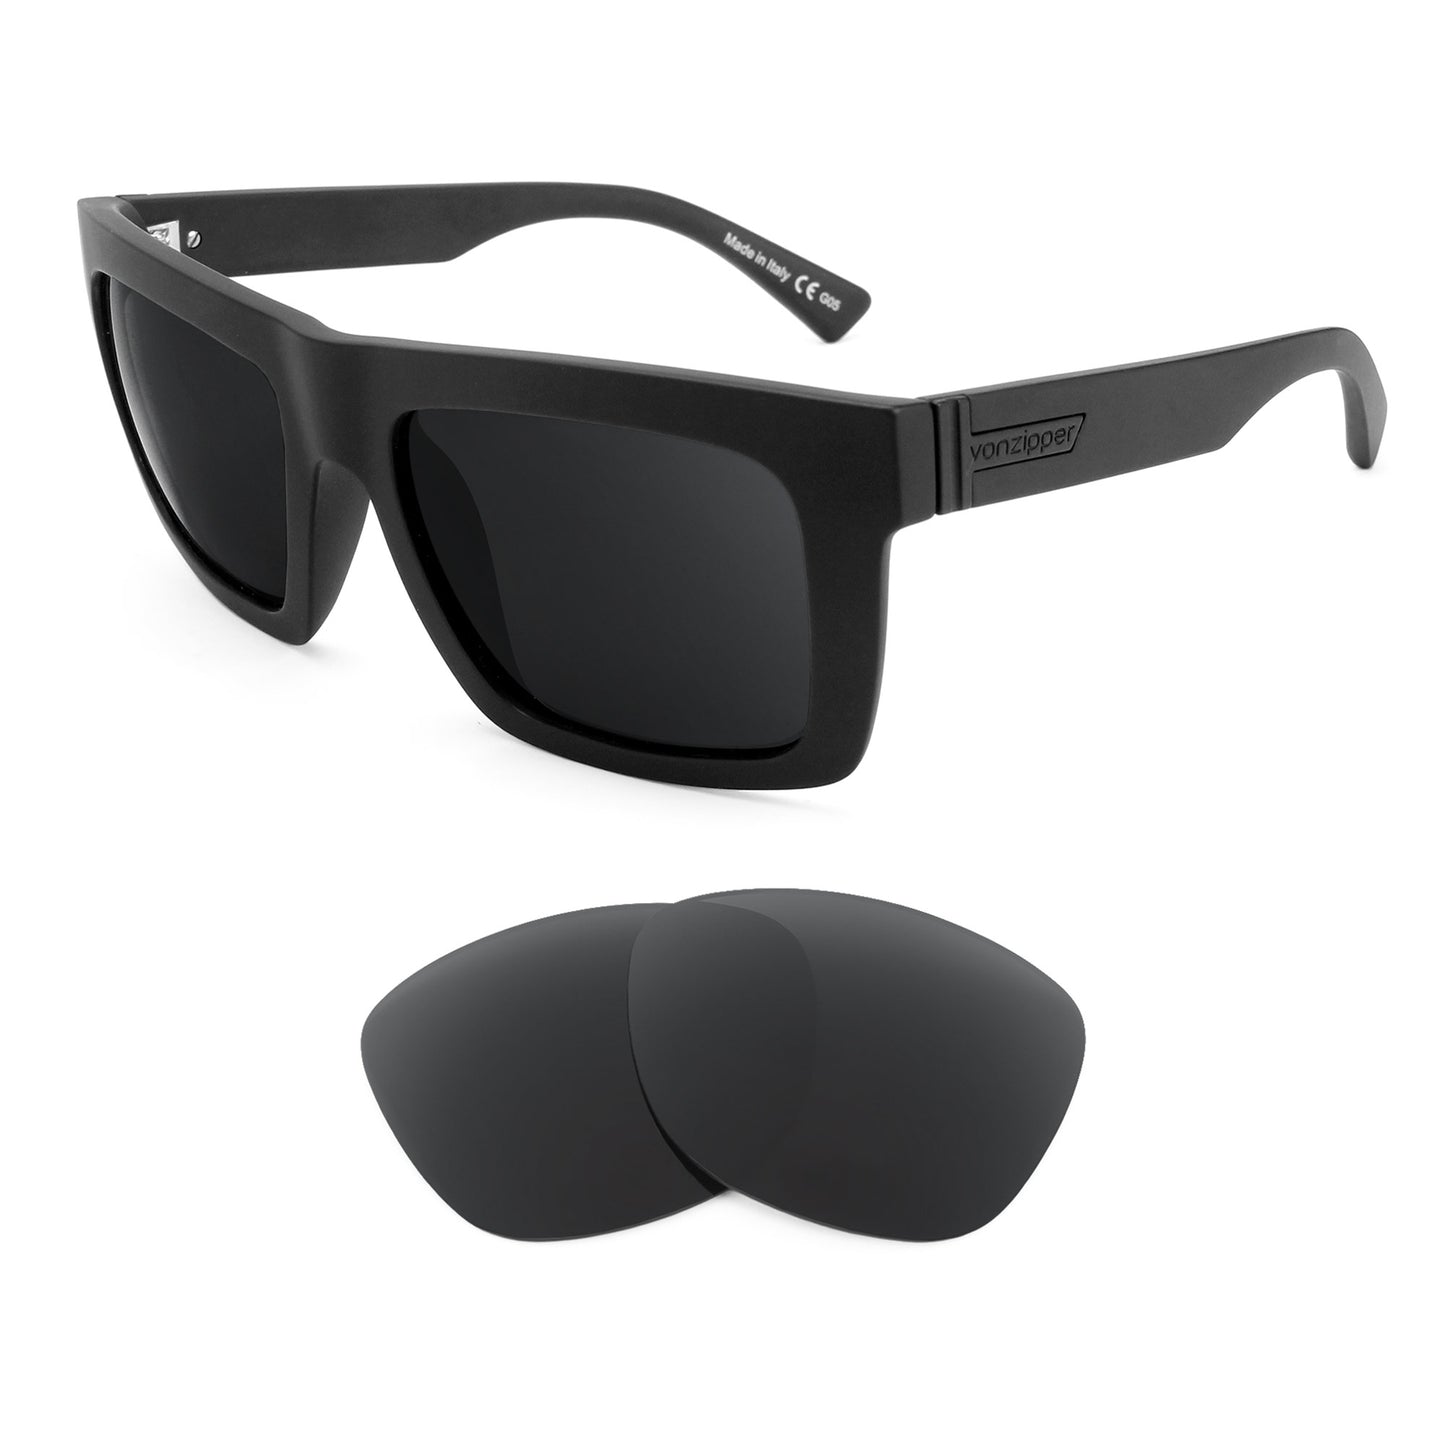 VonZipper Donmega sunglasses with replacement lenses